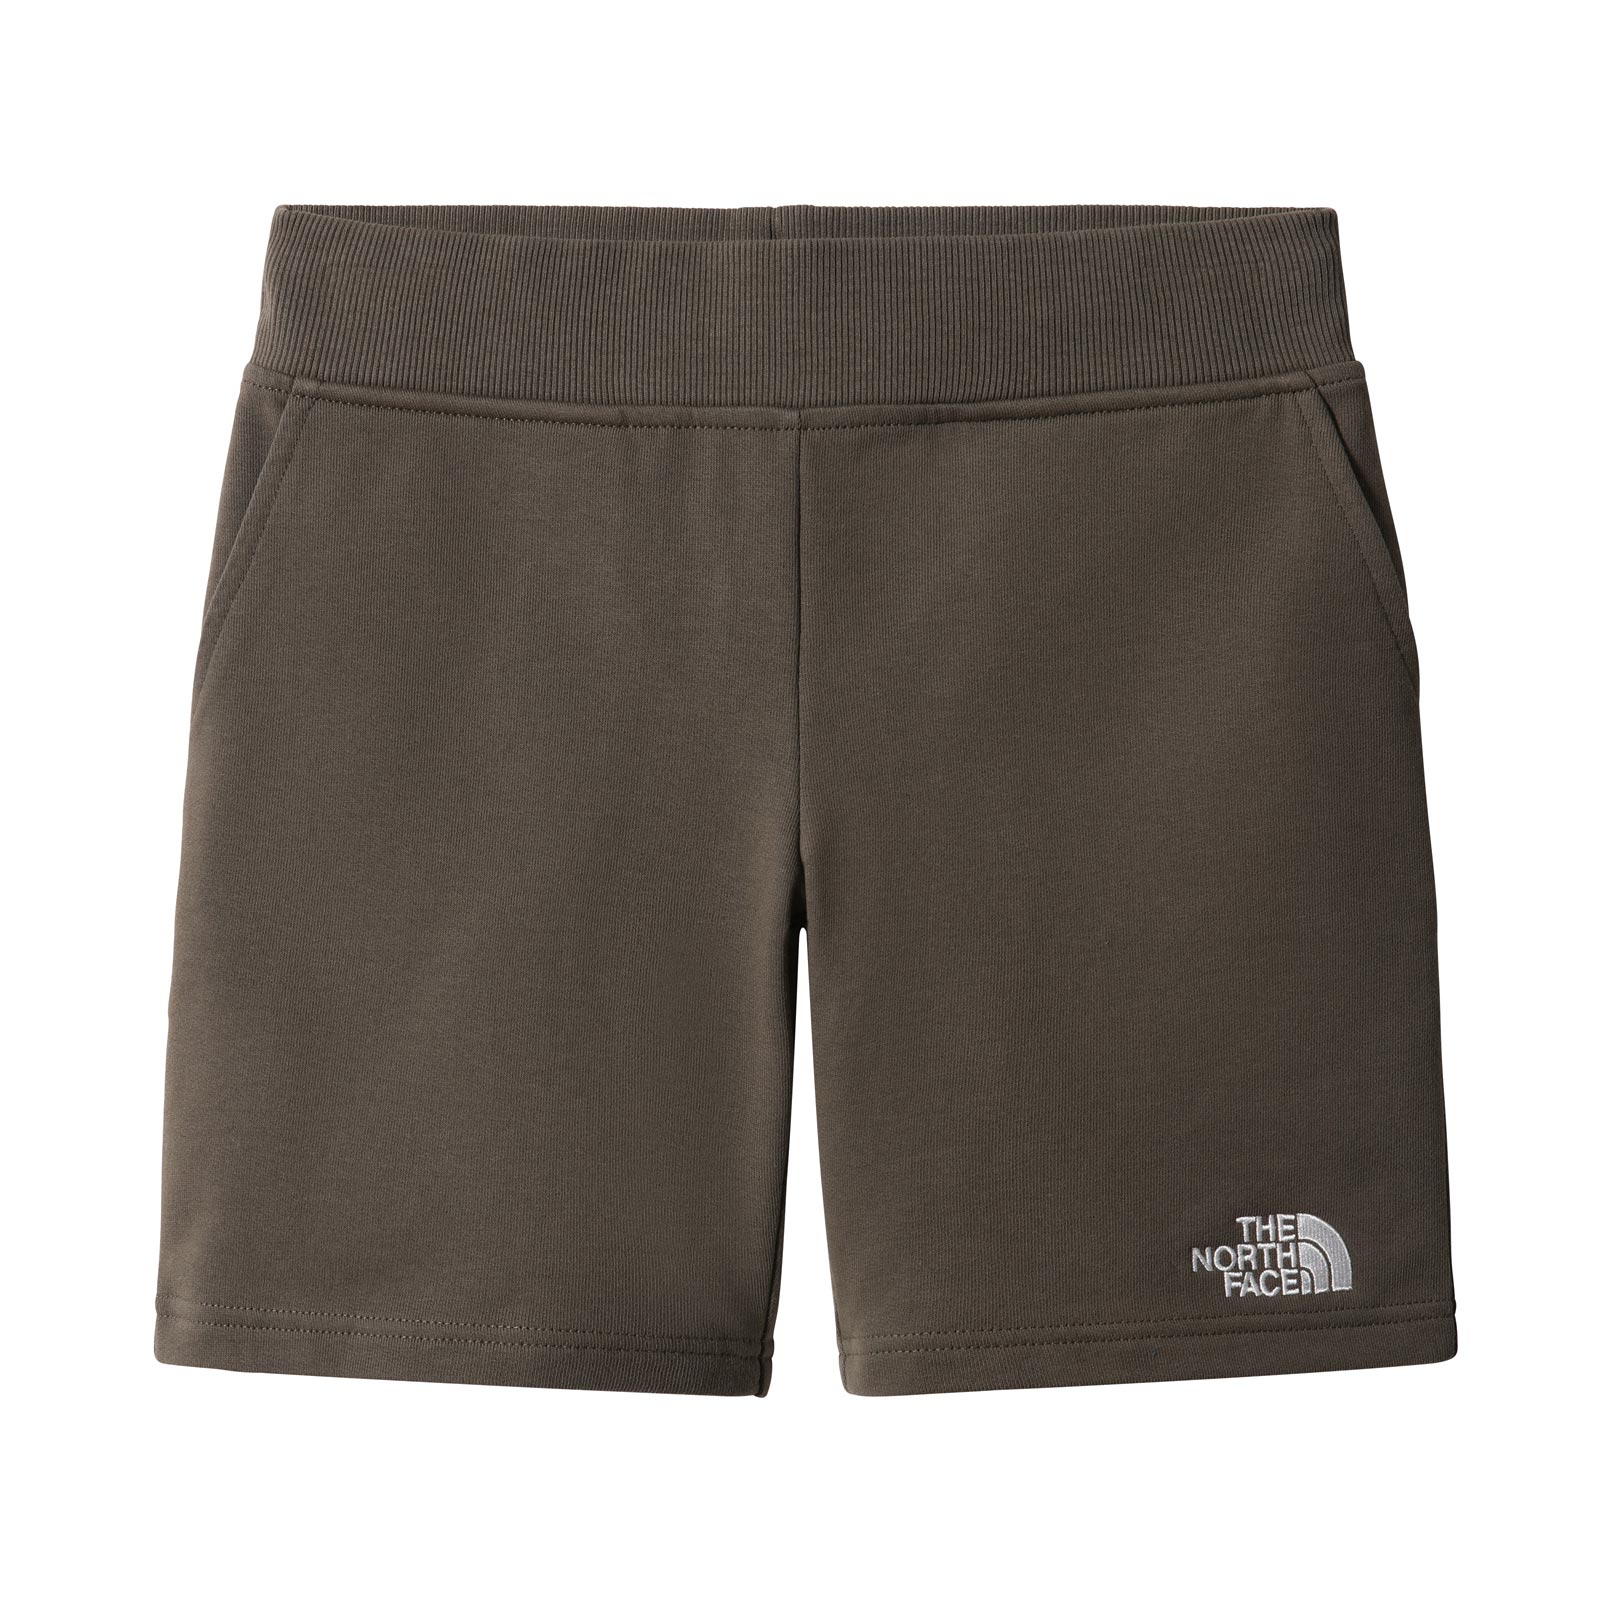 THE NORTH FACE YOUTH DREW PEAK LIGHT SHORTS